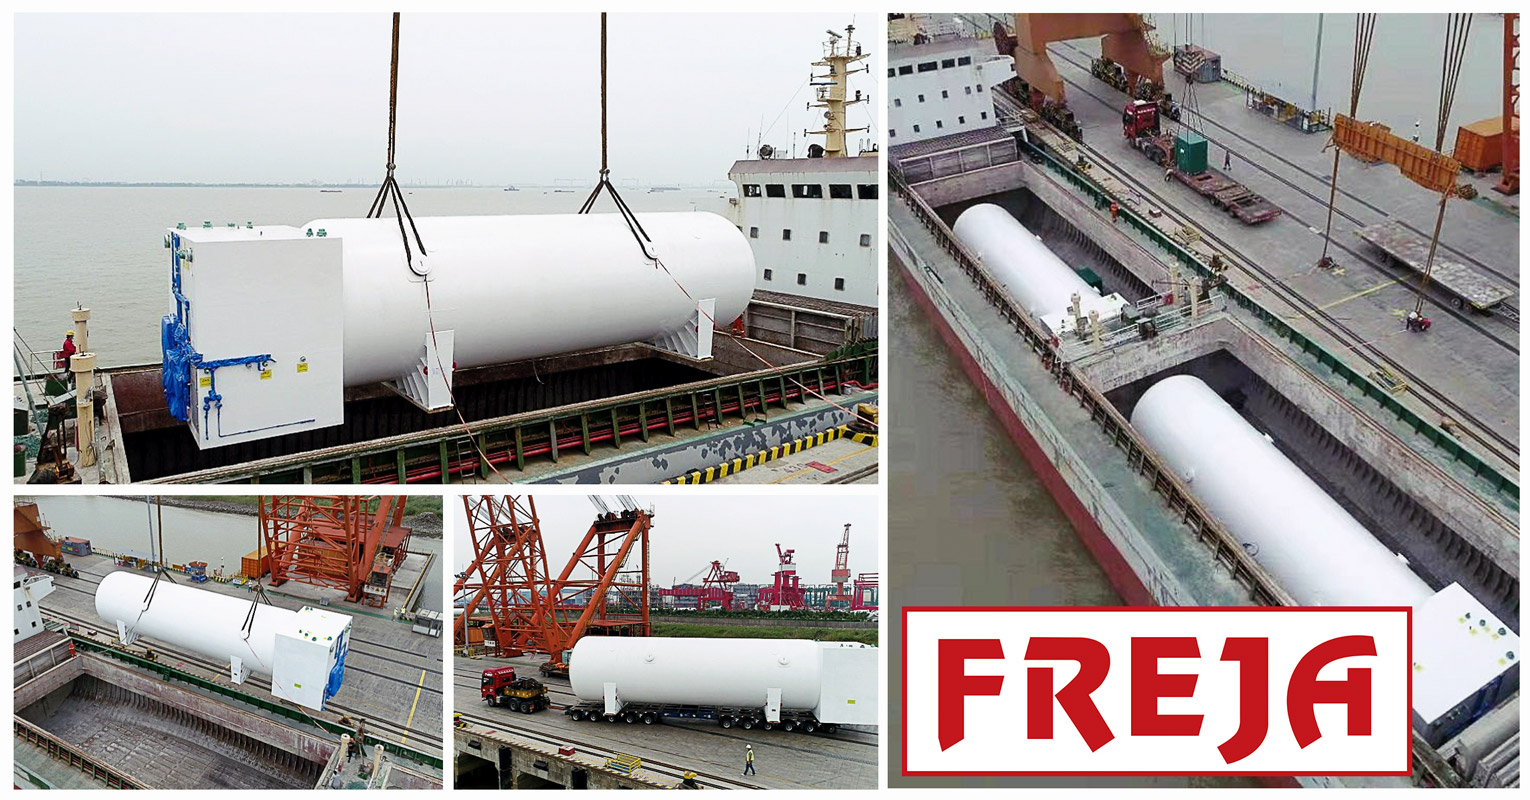 FREJA in China Carried-out Another Project Transport by Safely Loading these Heavy Pieces onto a Vessel in Zhangjiagang, China